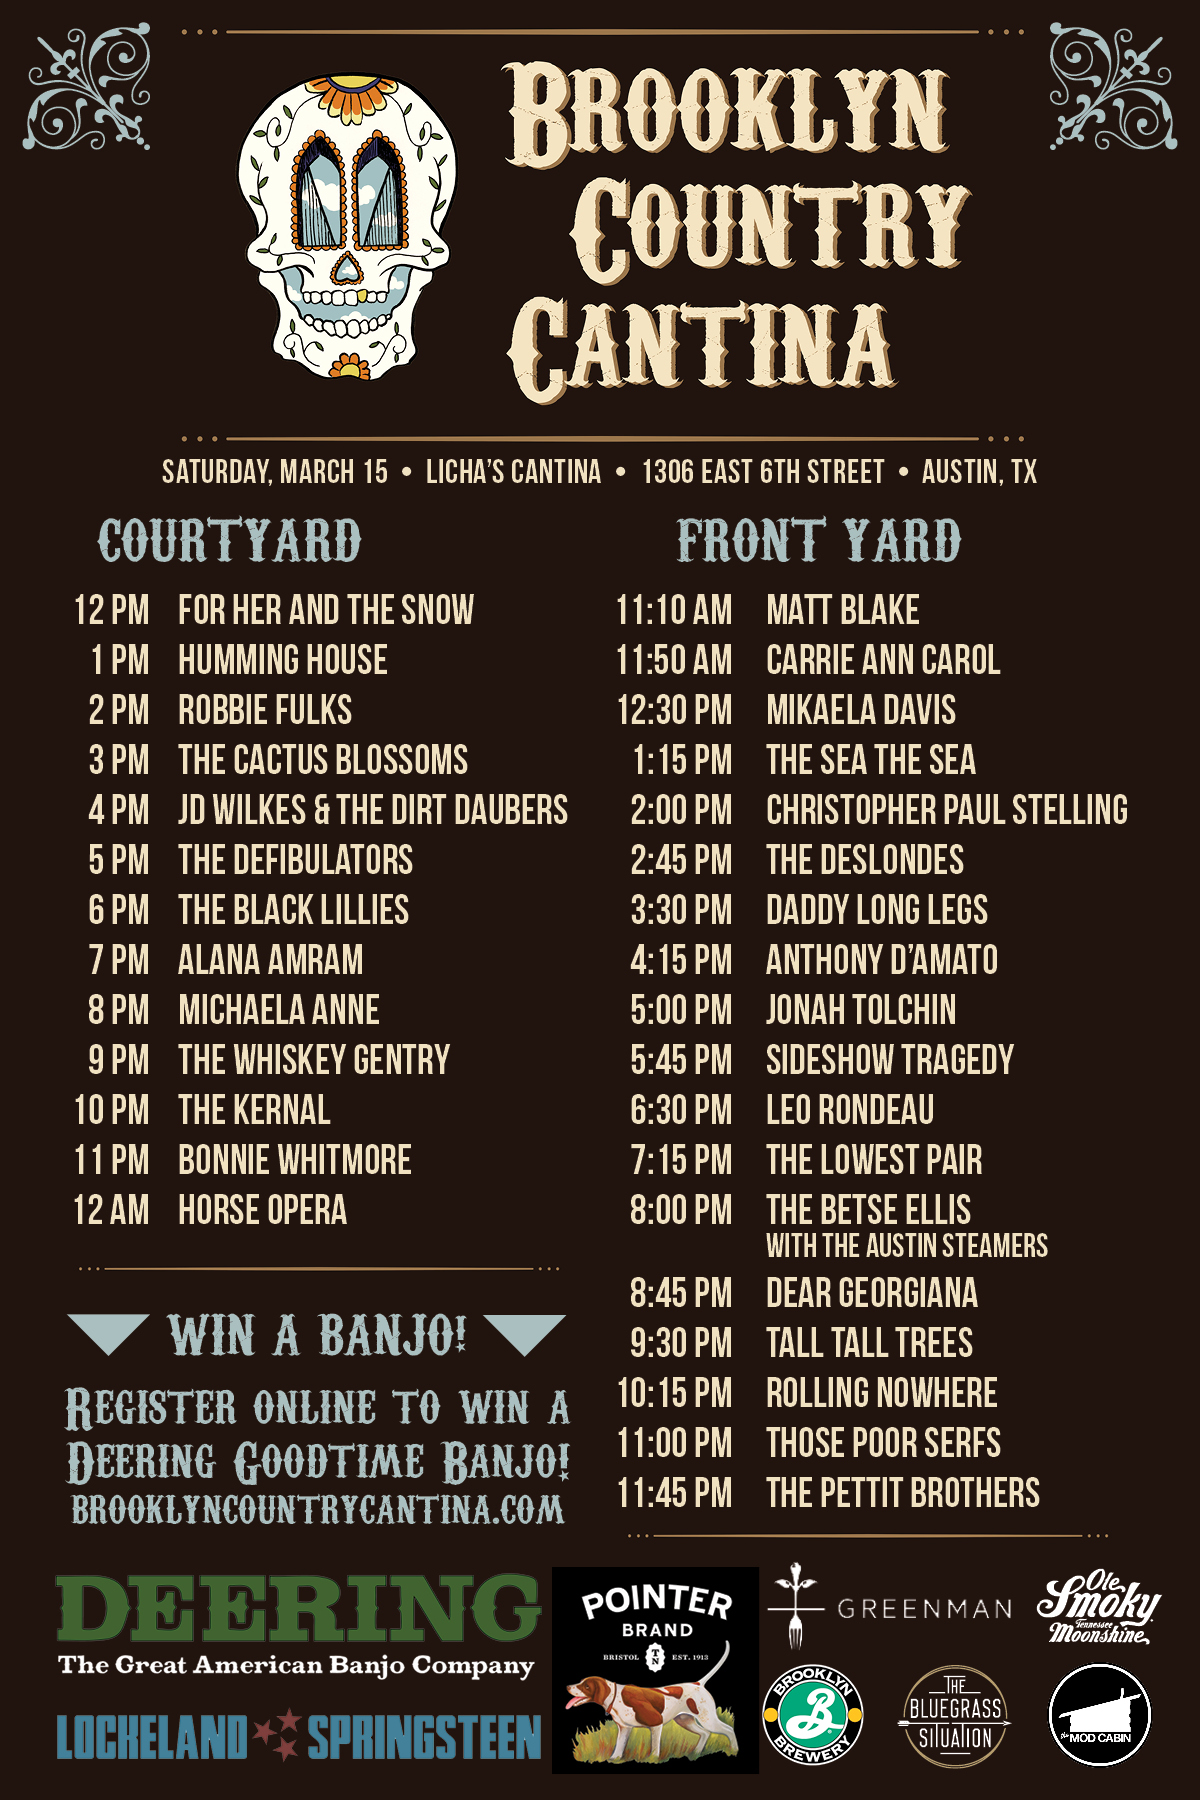 Brooklyn Country Cantina Flyer-NEW